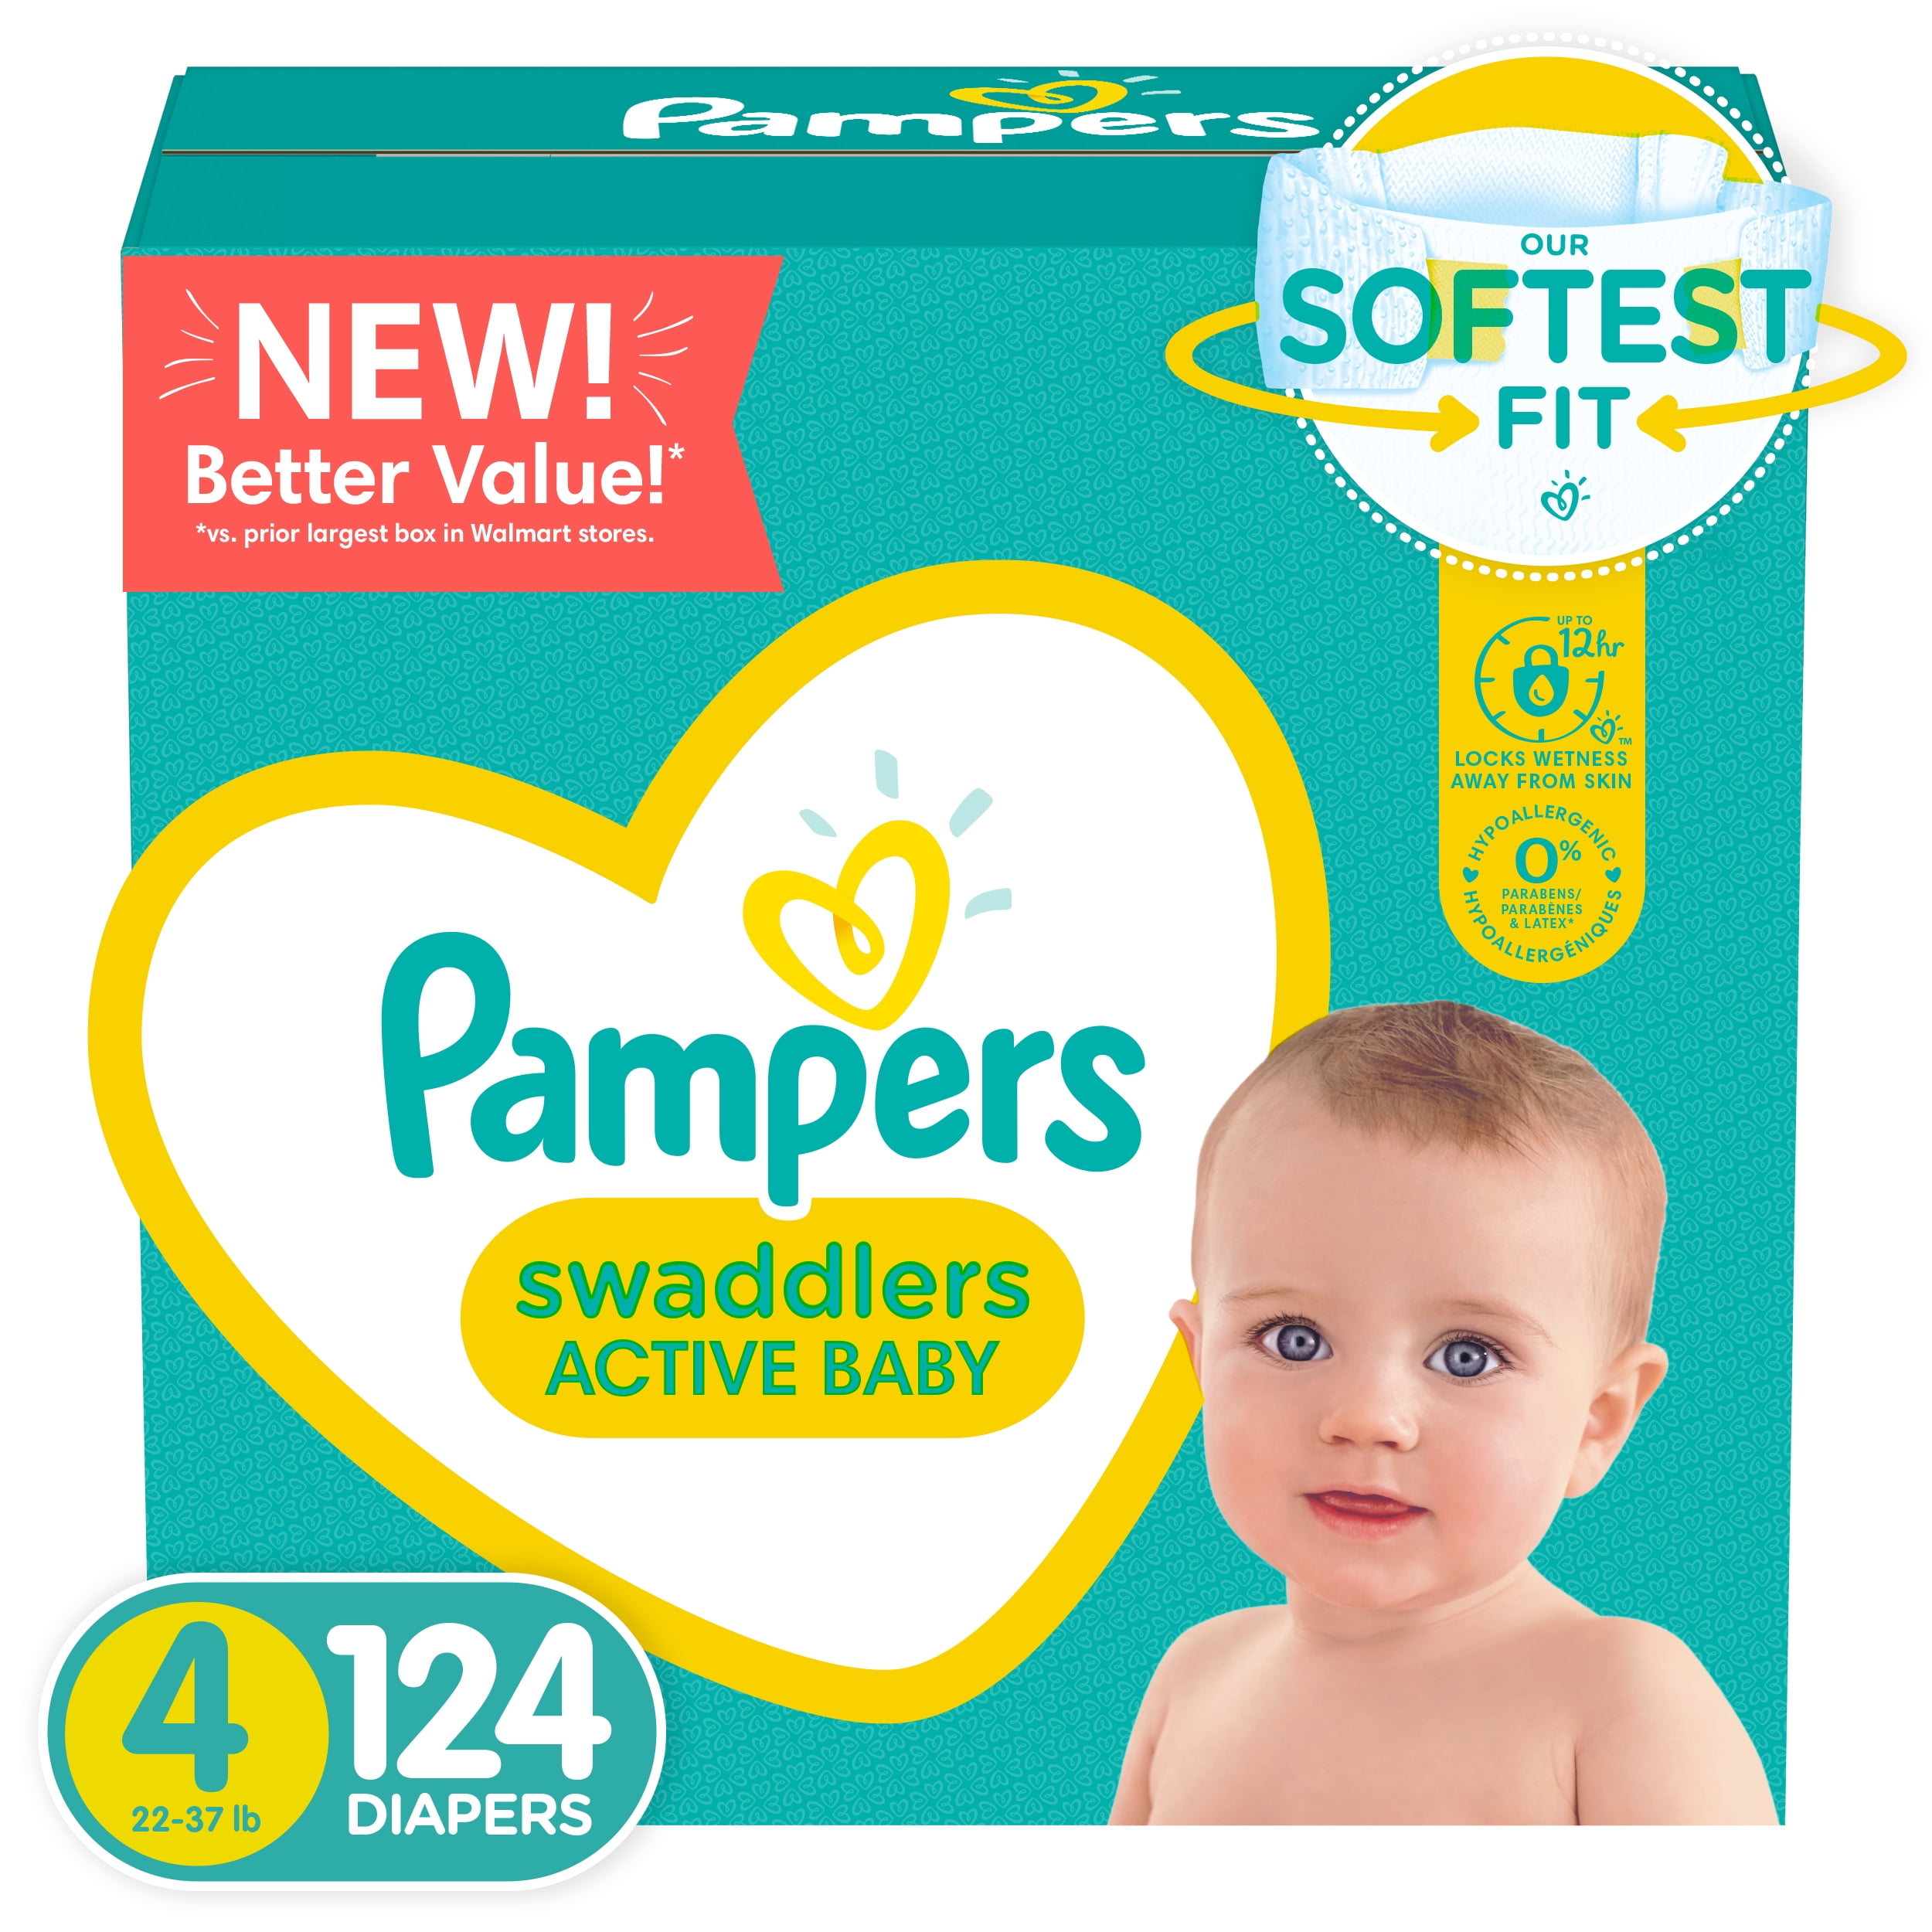 Pampers Swaddlers Active Baby Diapers, 4, 124 Count - Walmart.com